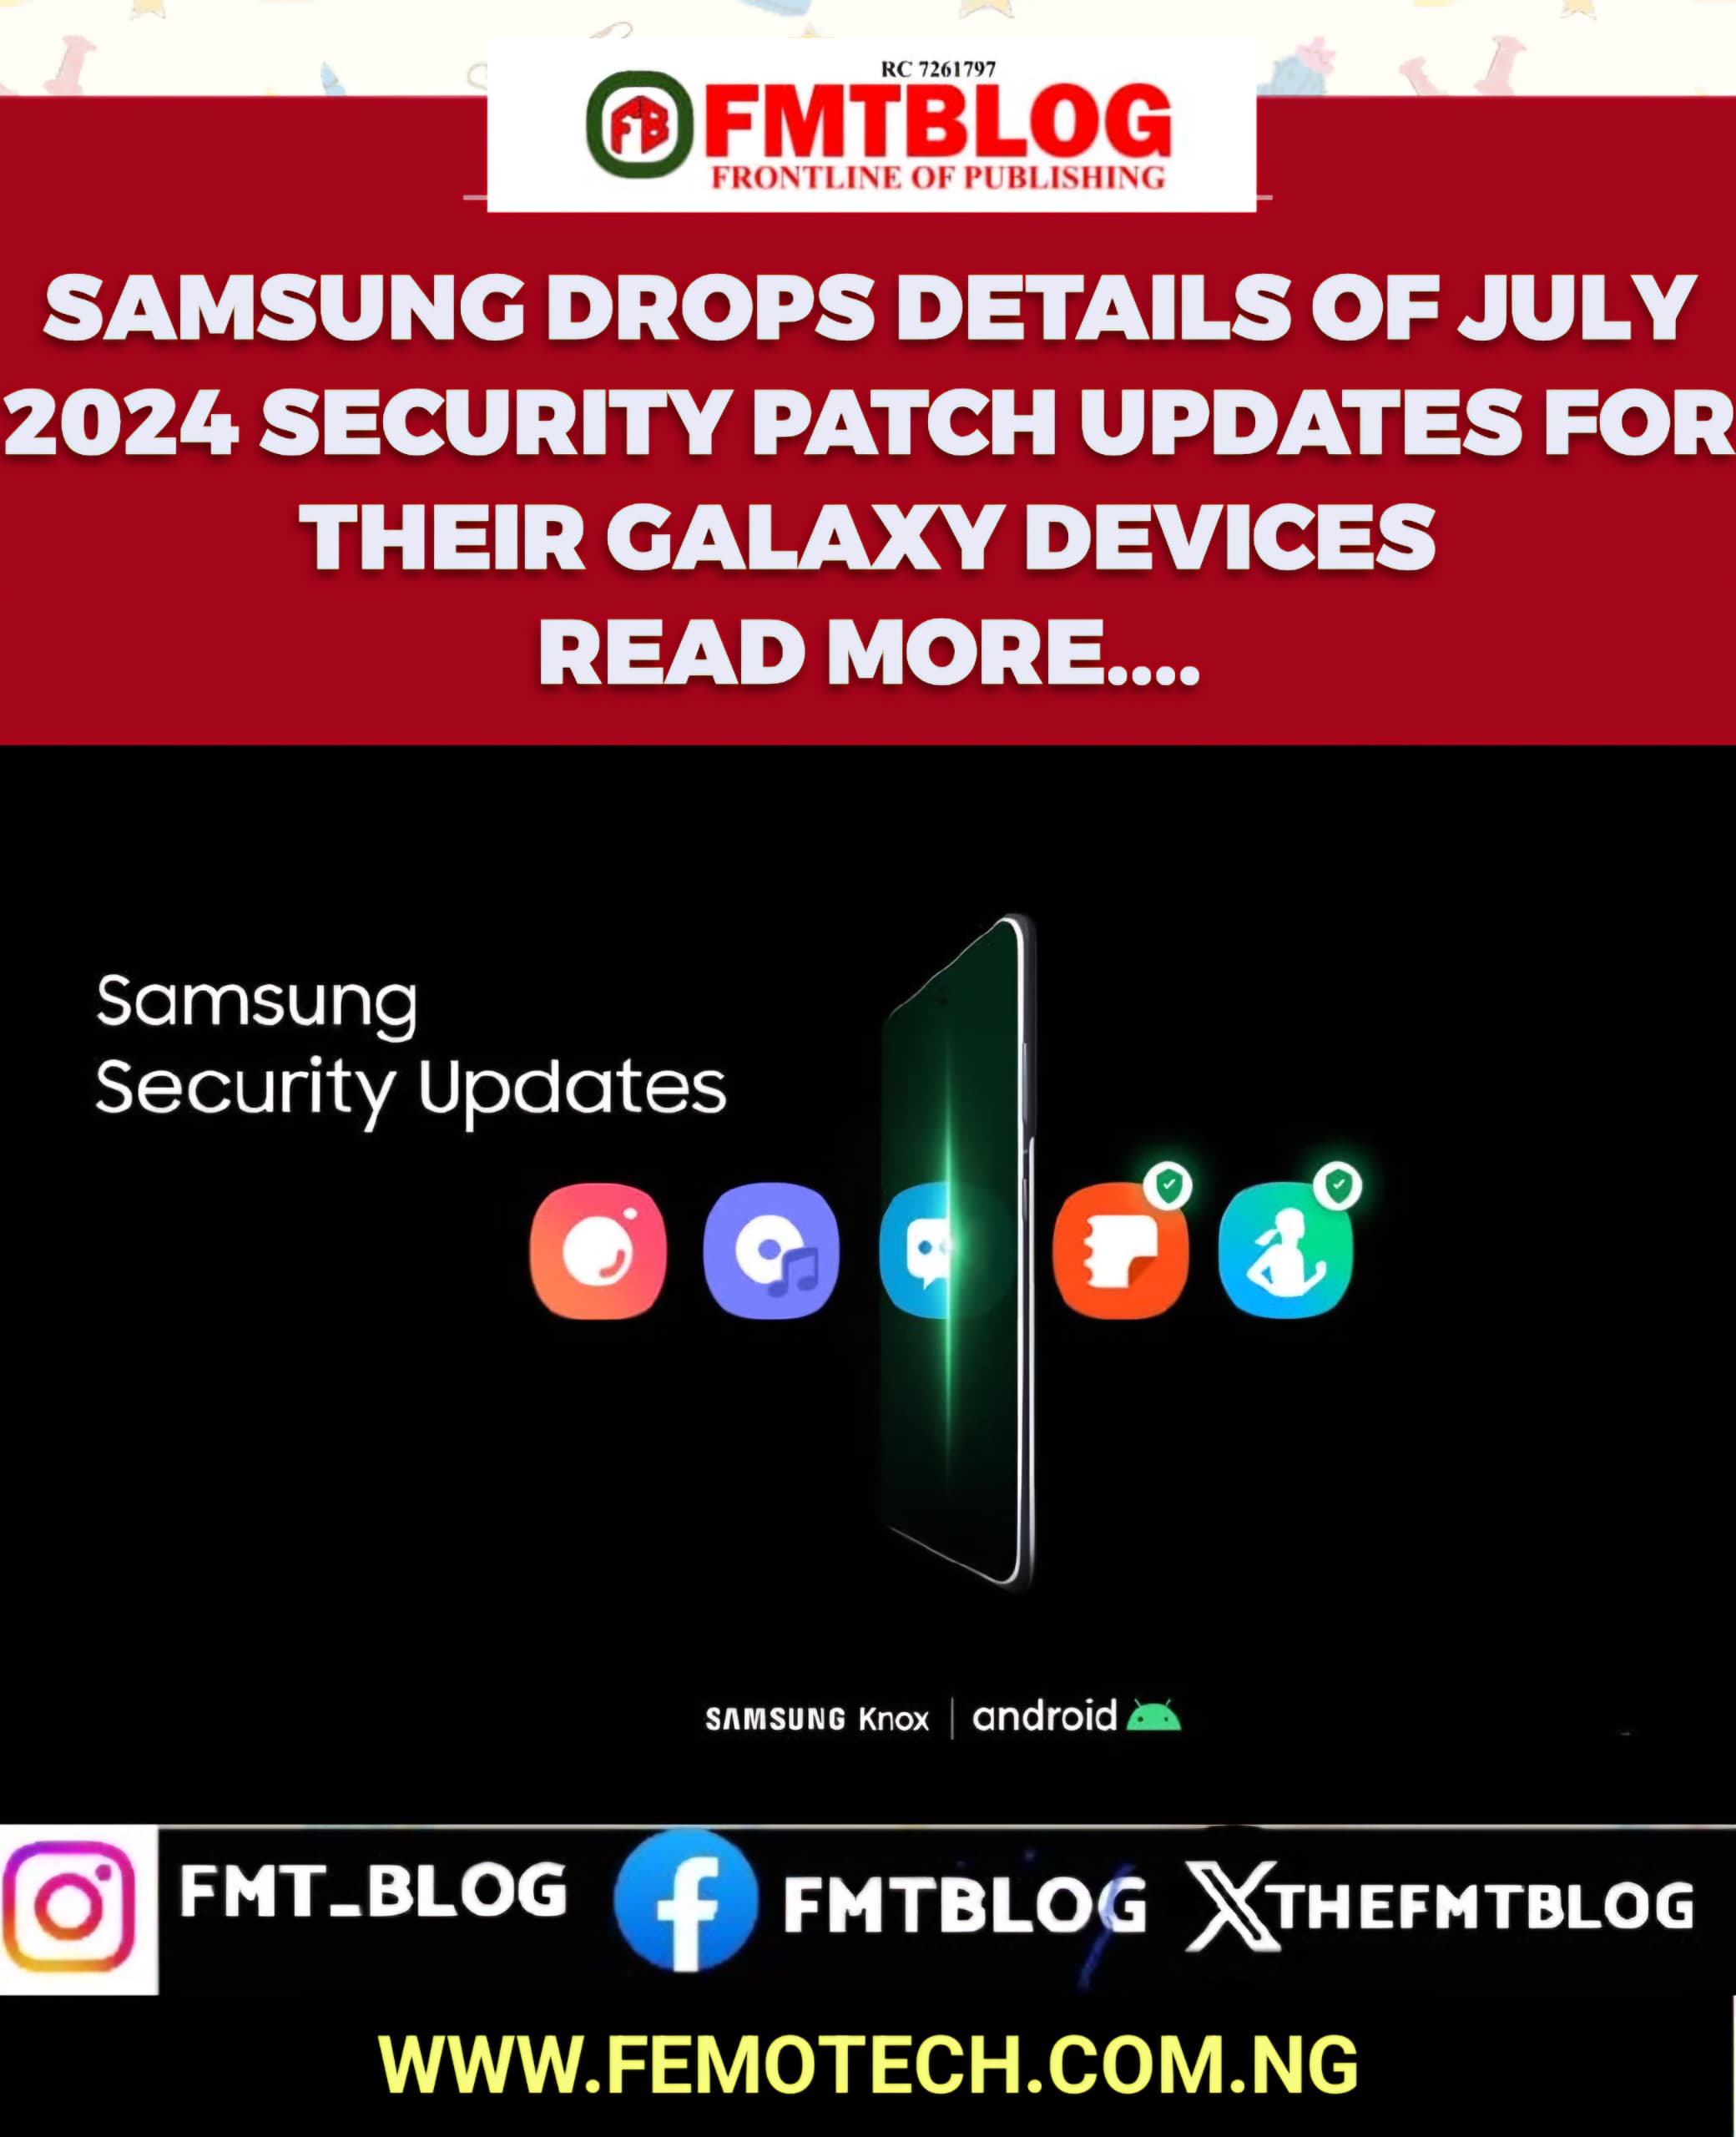 Samsung Drops Details Of July 2024 Security Patch Updates For Their Galaxy Devices